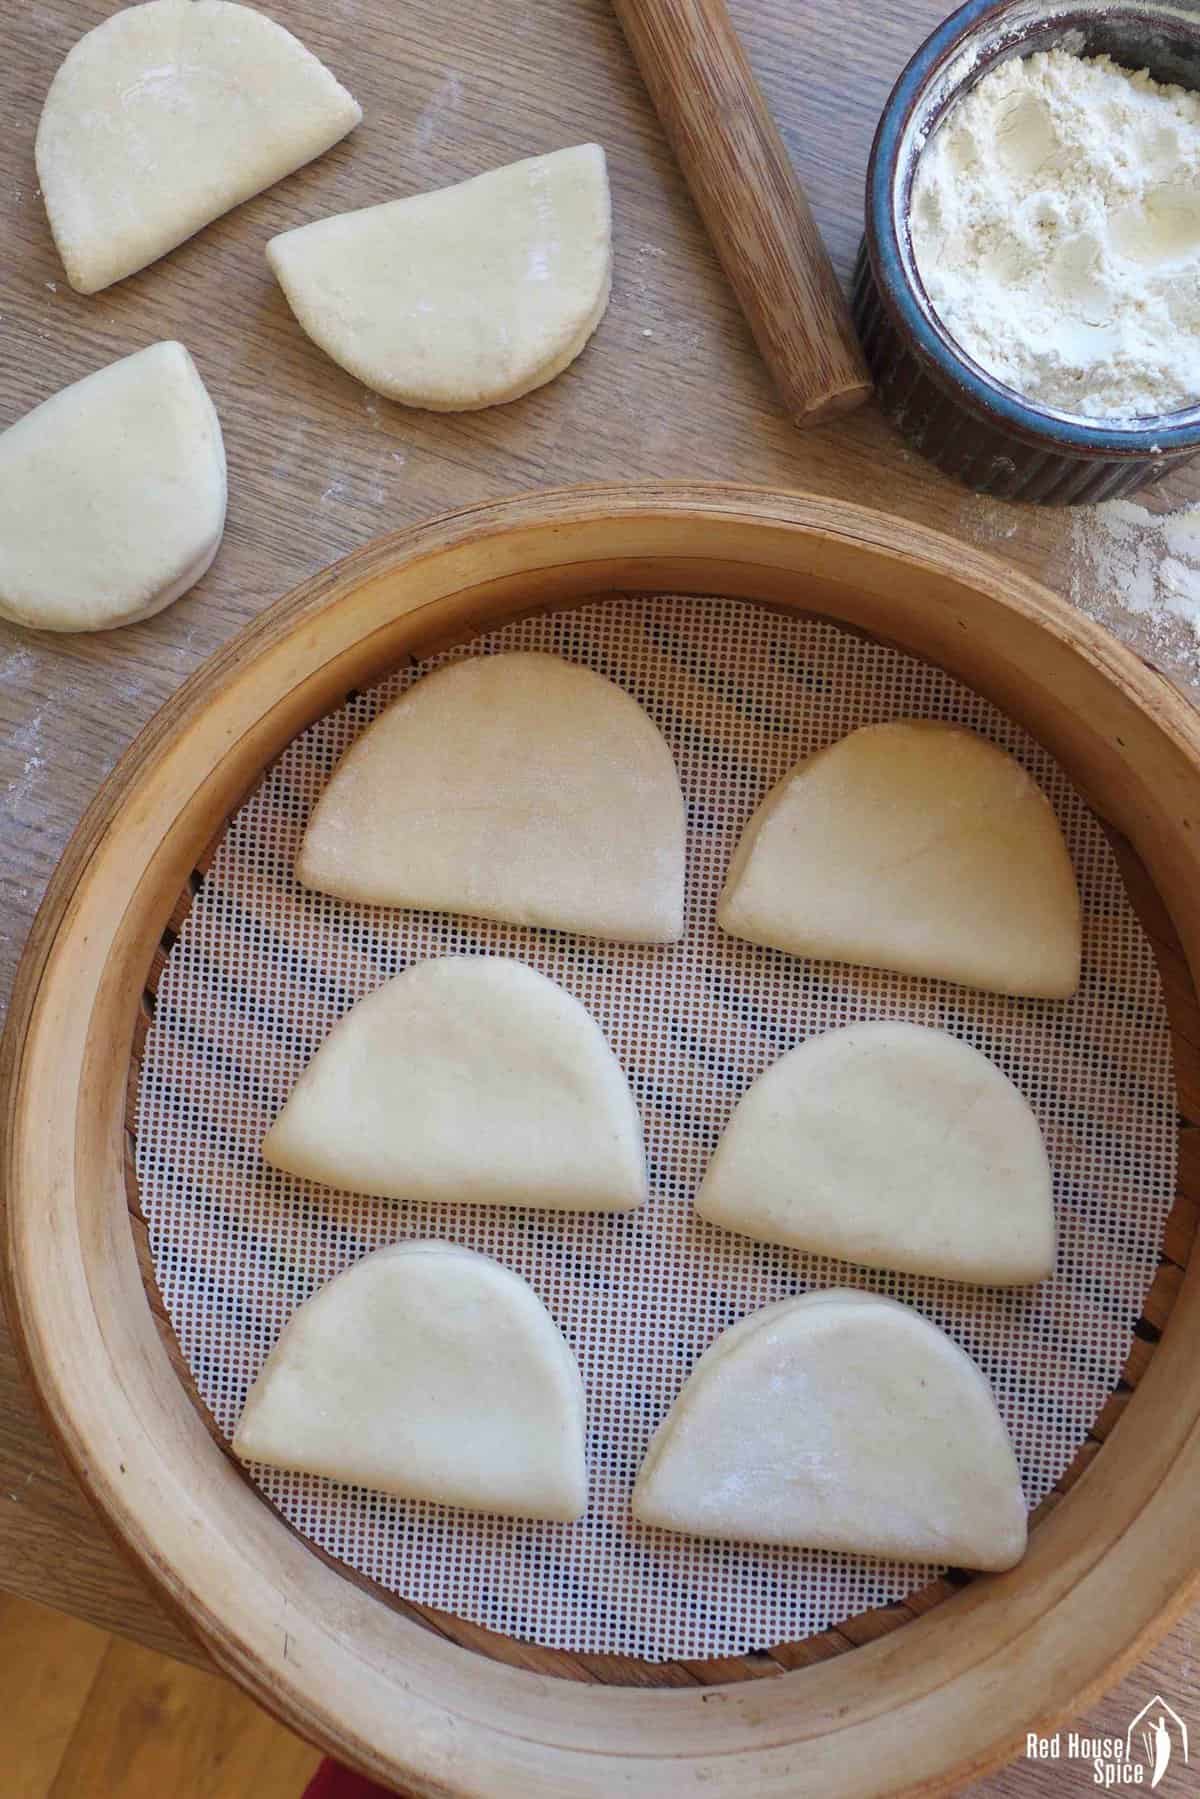 uncooked bao buns in a steamer.